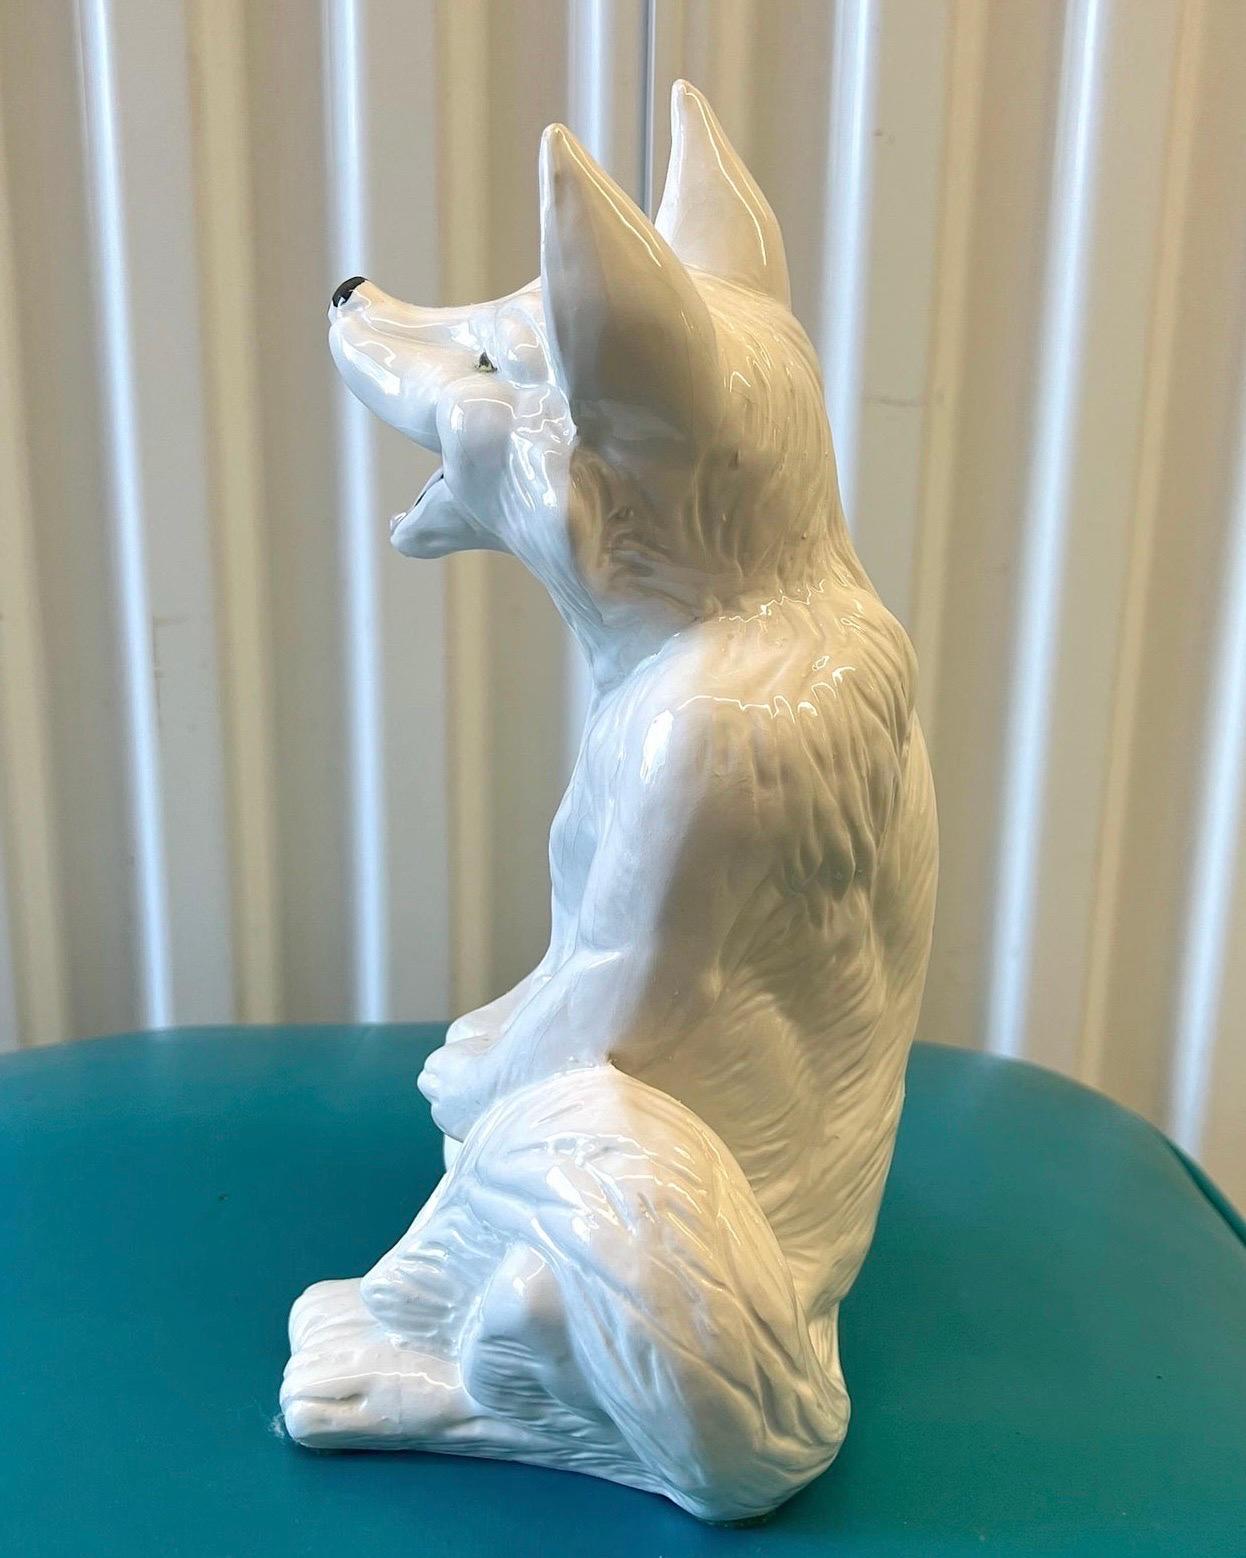 This is for one fabulous Large Italian Fox or baby wolf Ceramic Figure.   He or she looks like she is smiling up at you.    Hand painted in Italy circa 1970